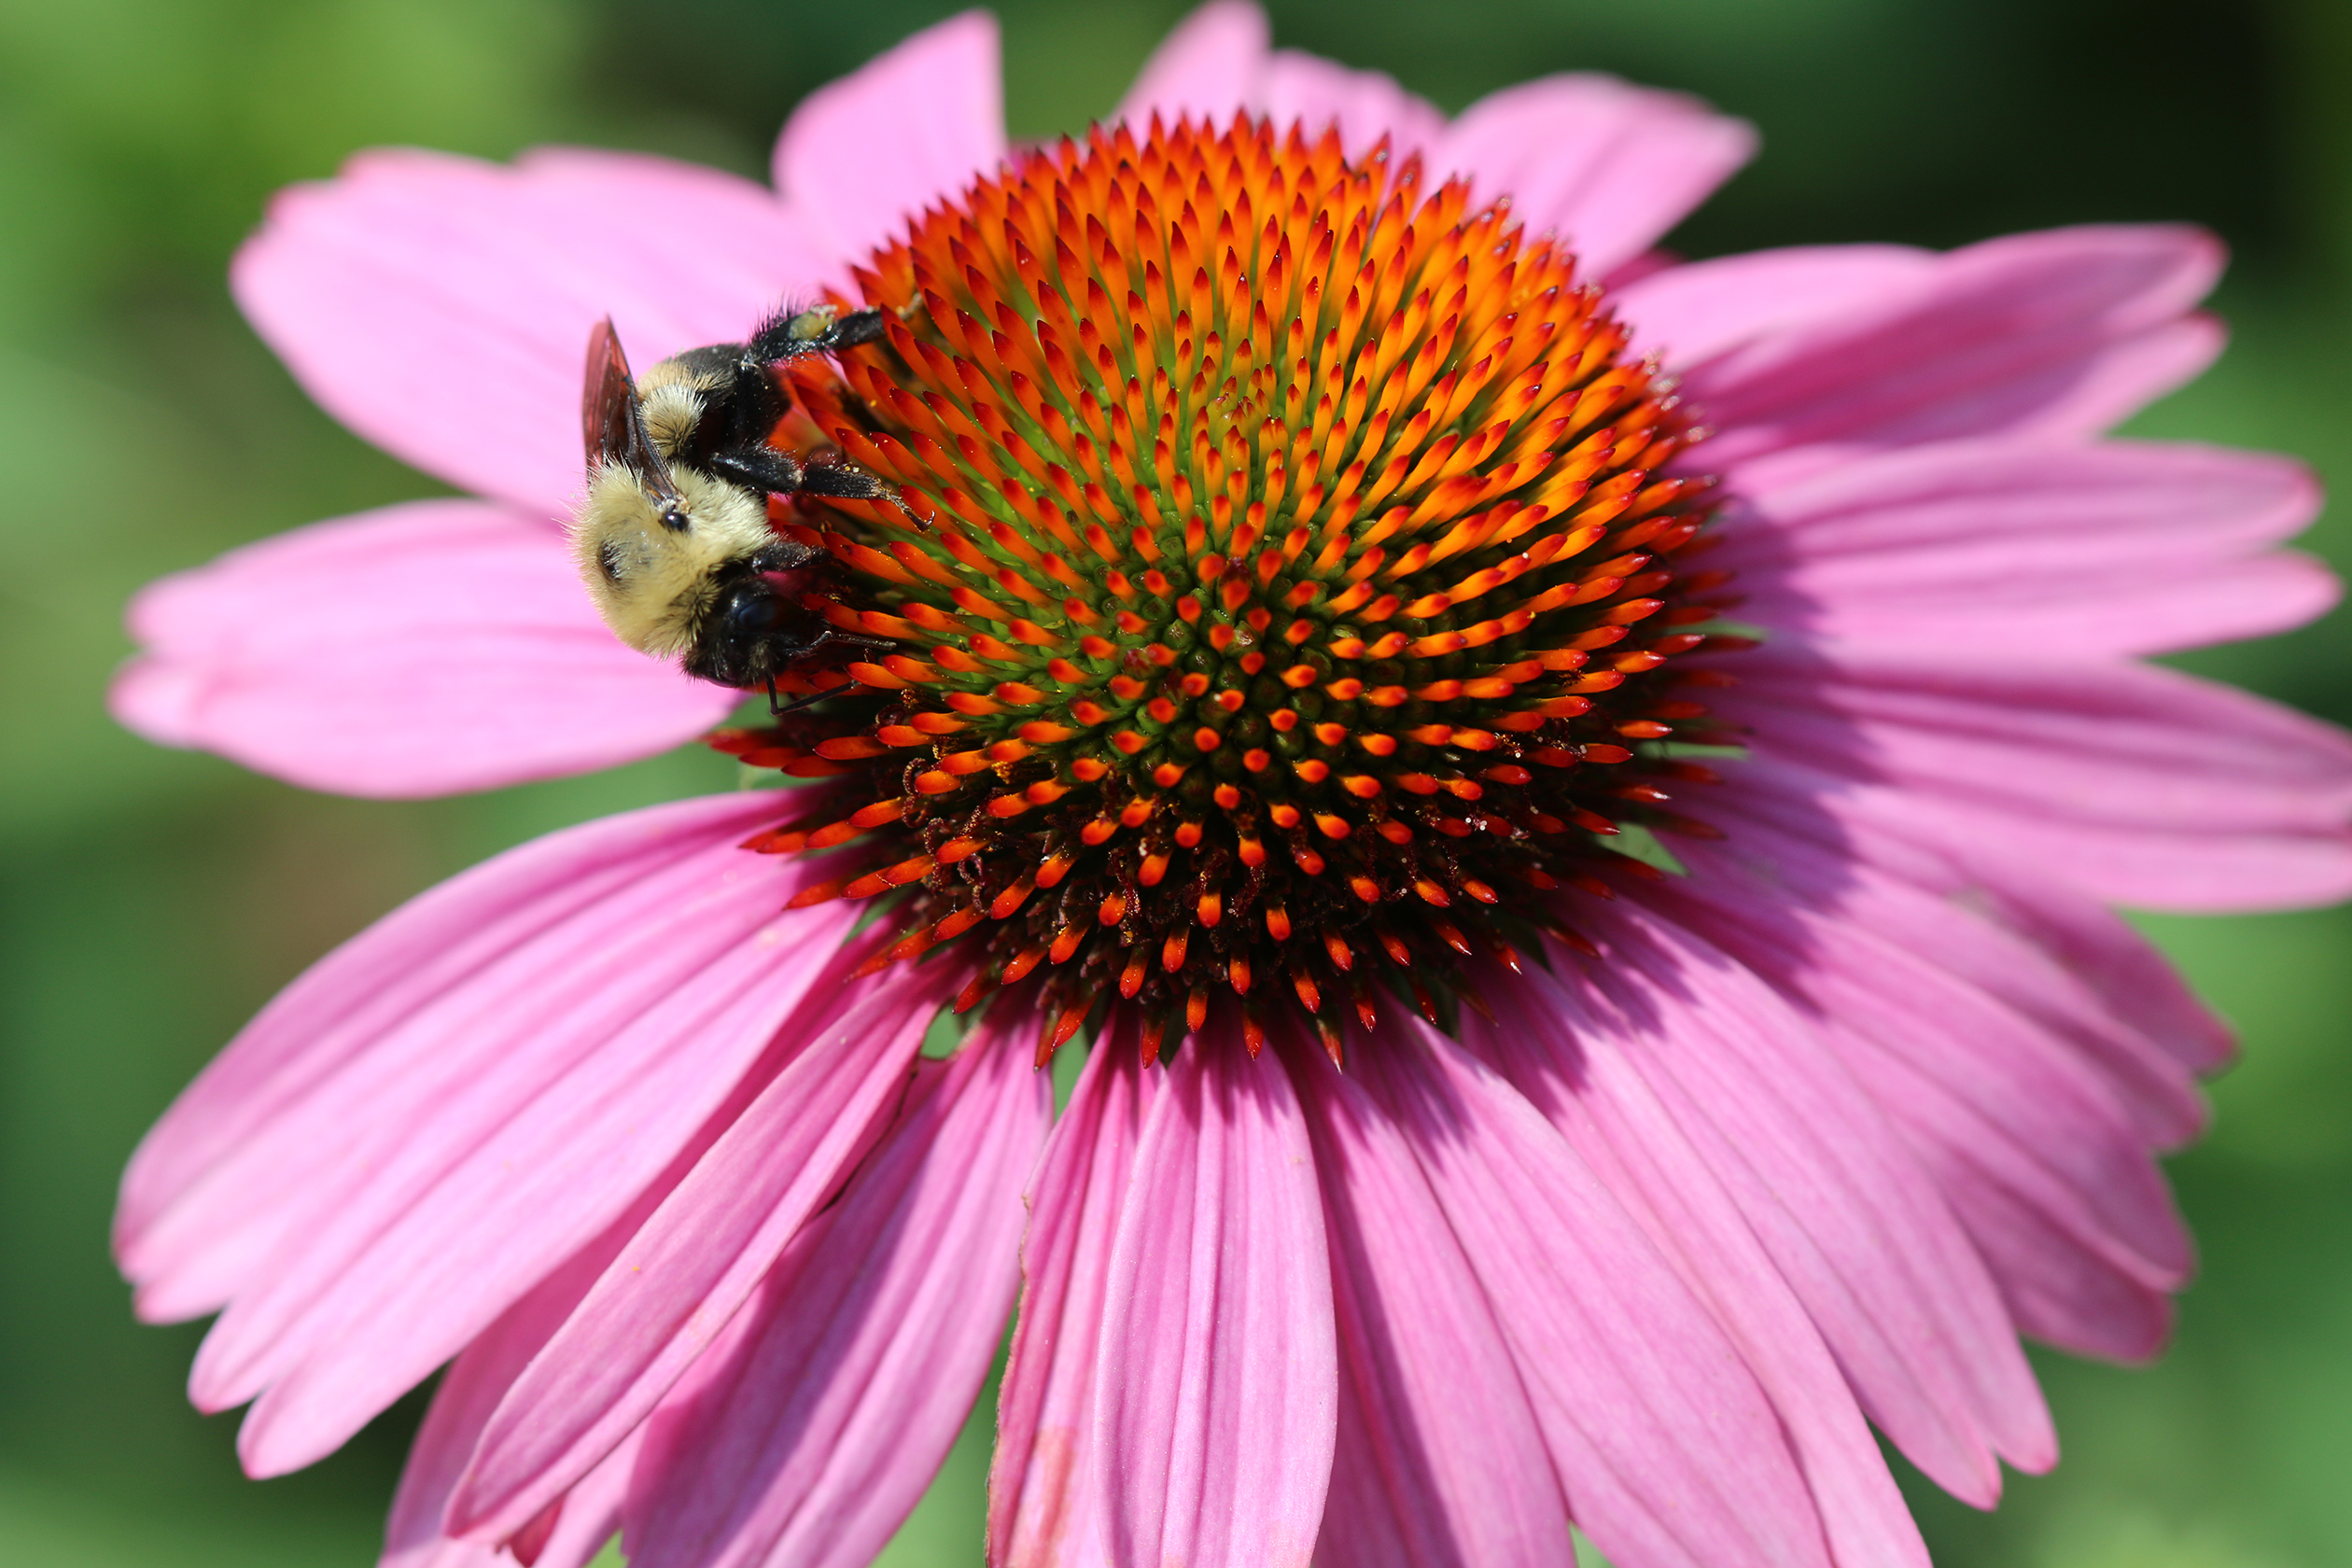 A yellow and black striped bumble bee drinks nectar on the perfectly rounded dome of this purple coneflower.